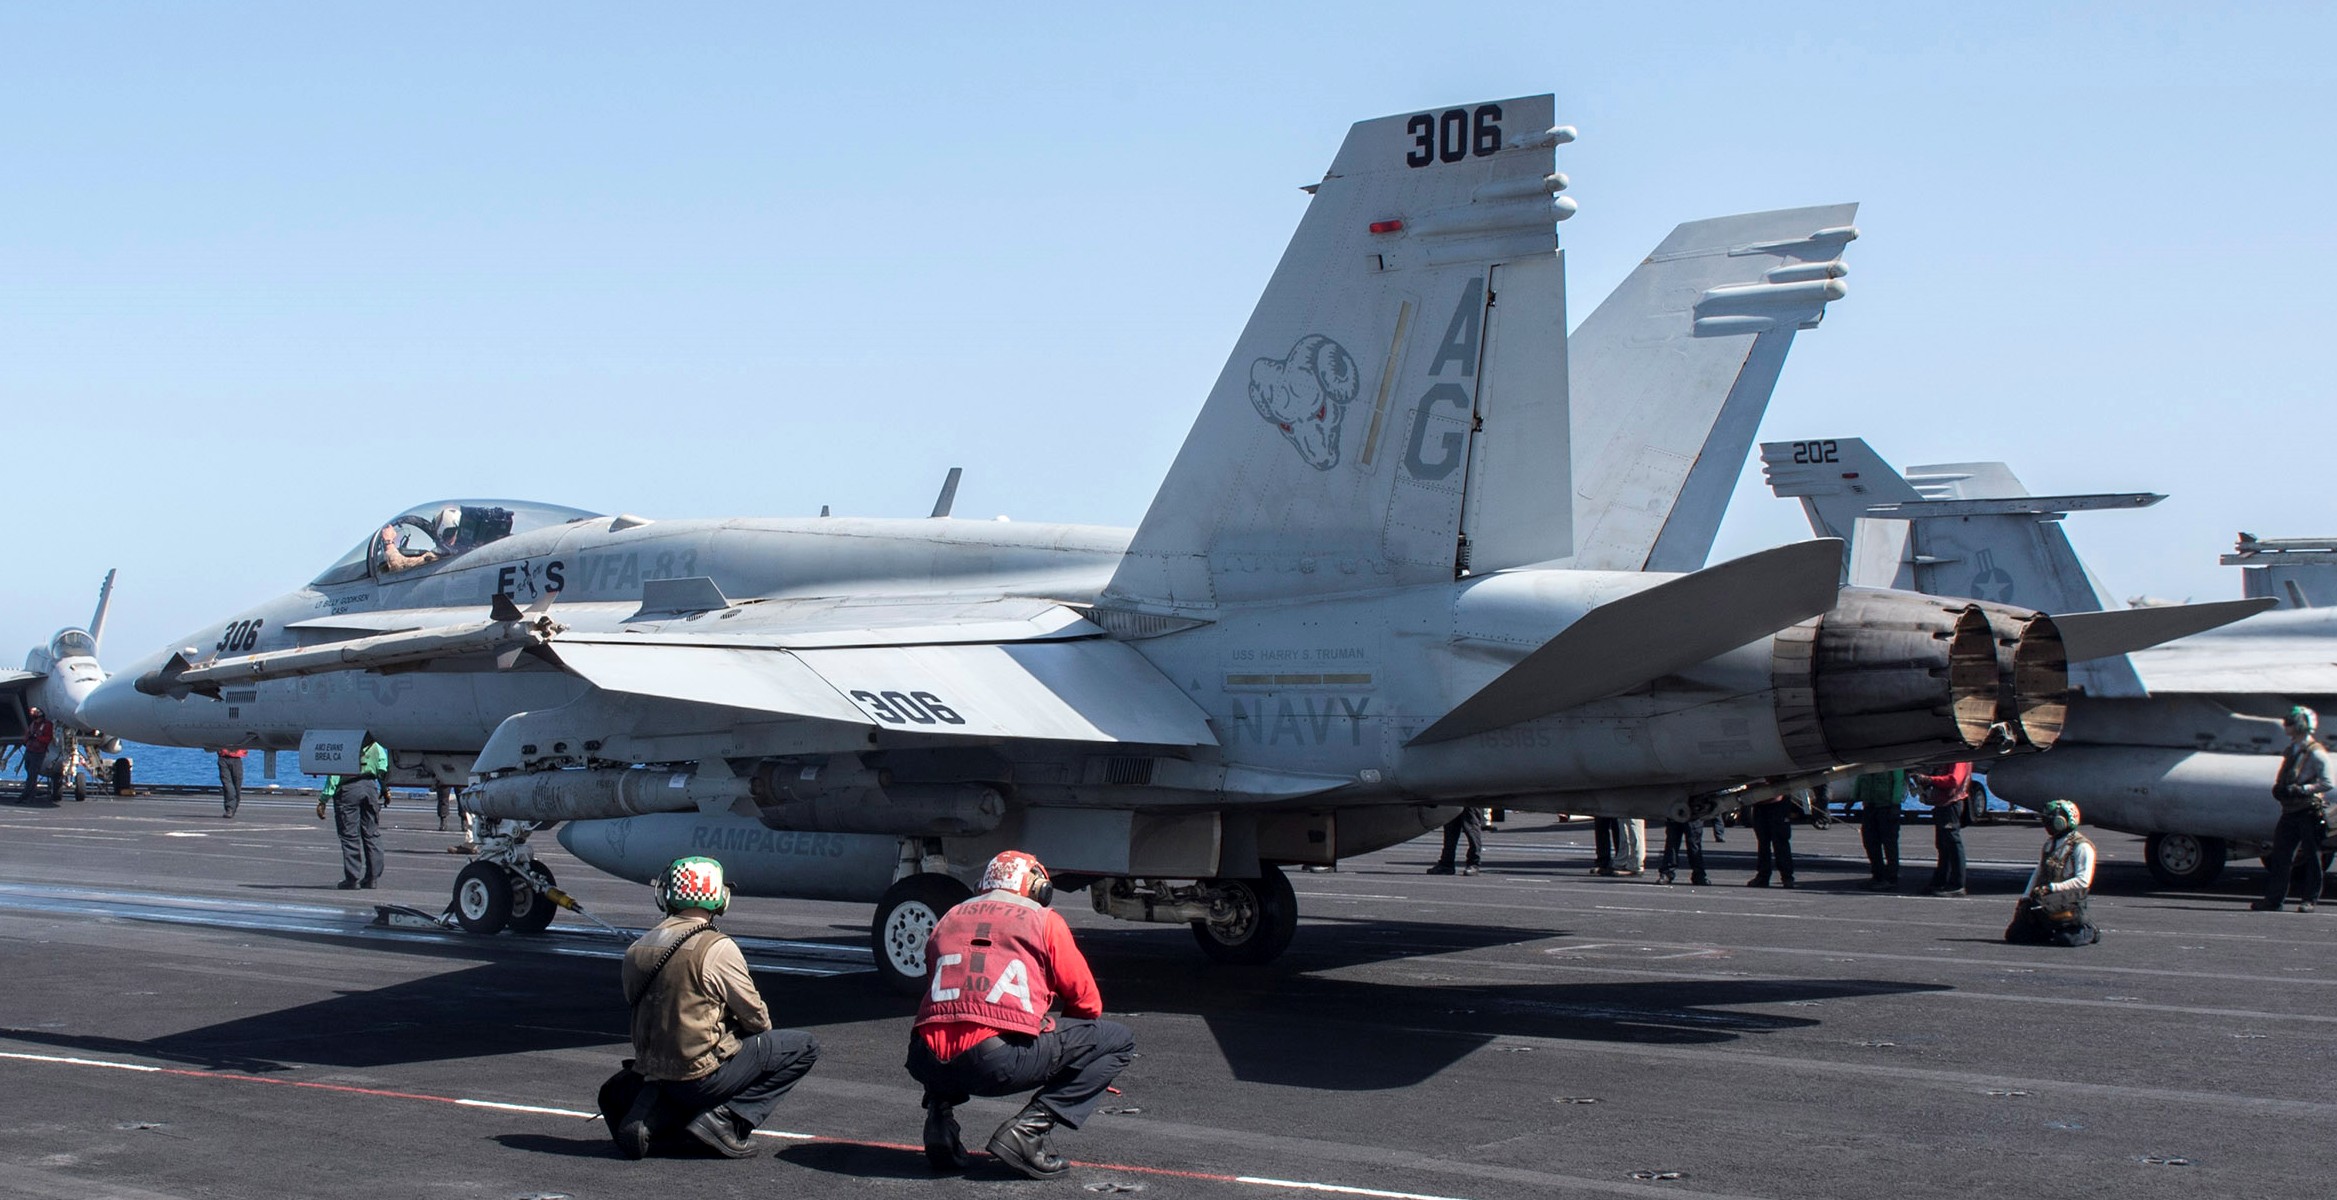 vfa-83 rampagers strike fighter squadron f/a-18c hornet cvw-7 uss harry s. truman cvn-75 53p